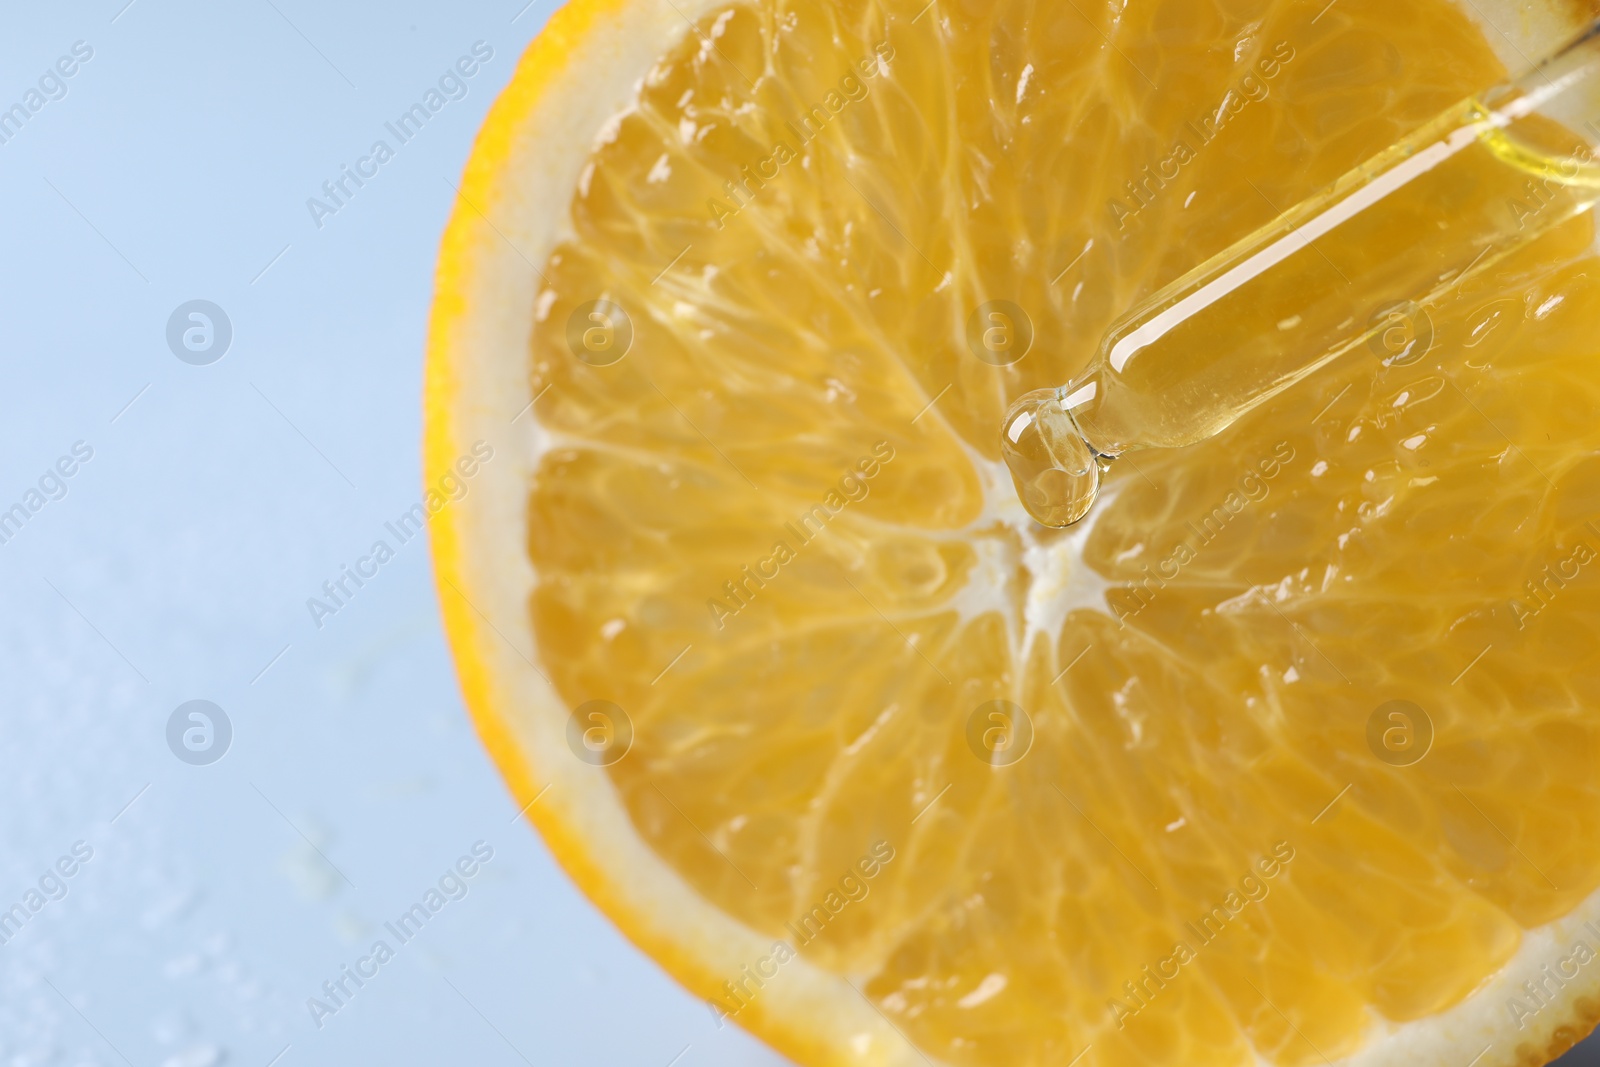 Photo of Dripping cosmetic serum from pipette onto orange slice against light blue background, top view